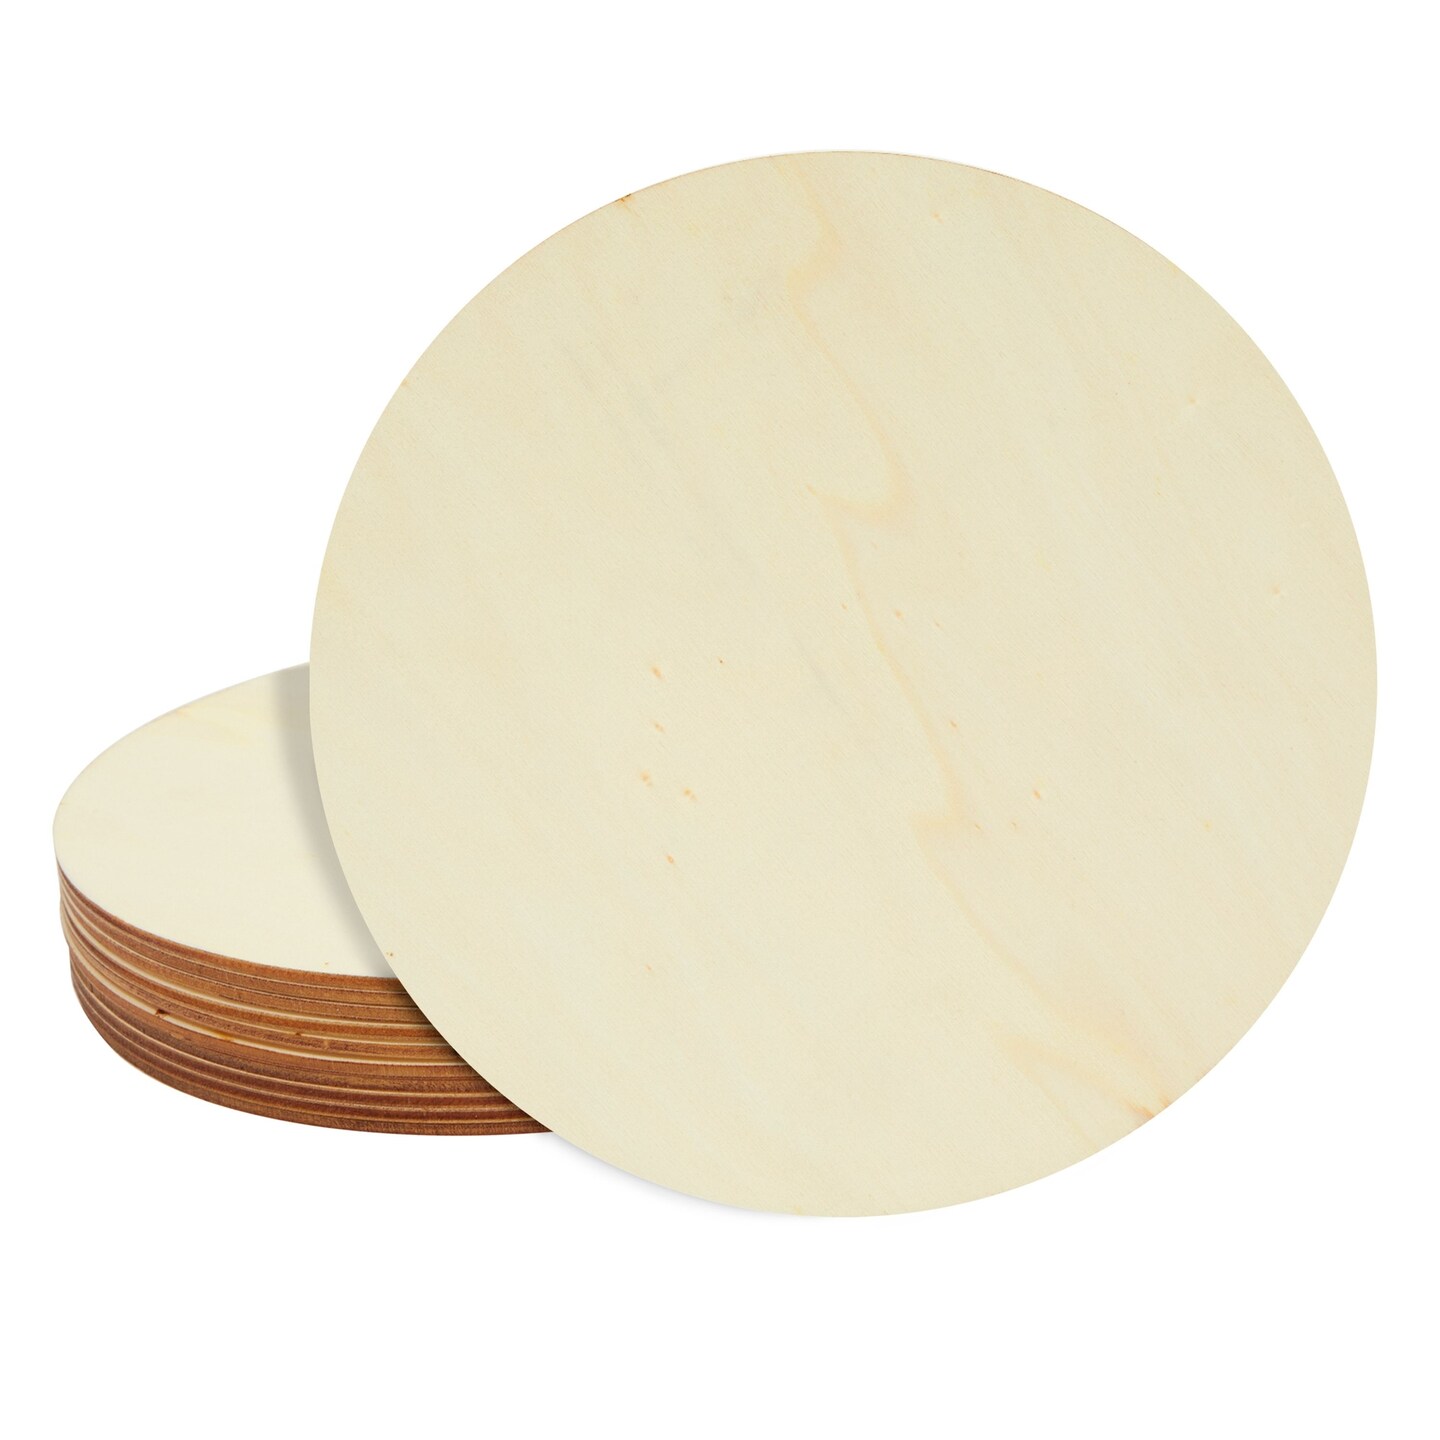 10 Pack Unfinished Circle Wood Pieces, 8 Inch Cutouts for Painting Crafts, DIY Crafts, Wooden Blanks